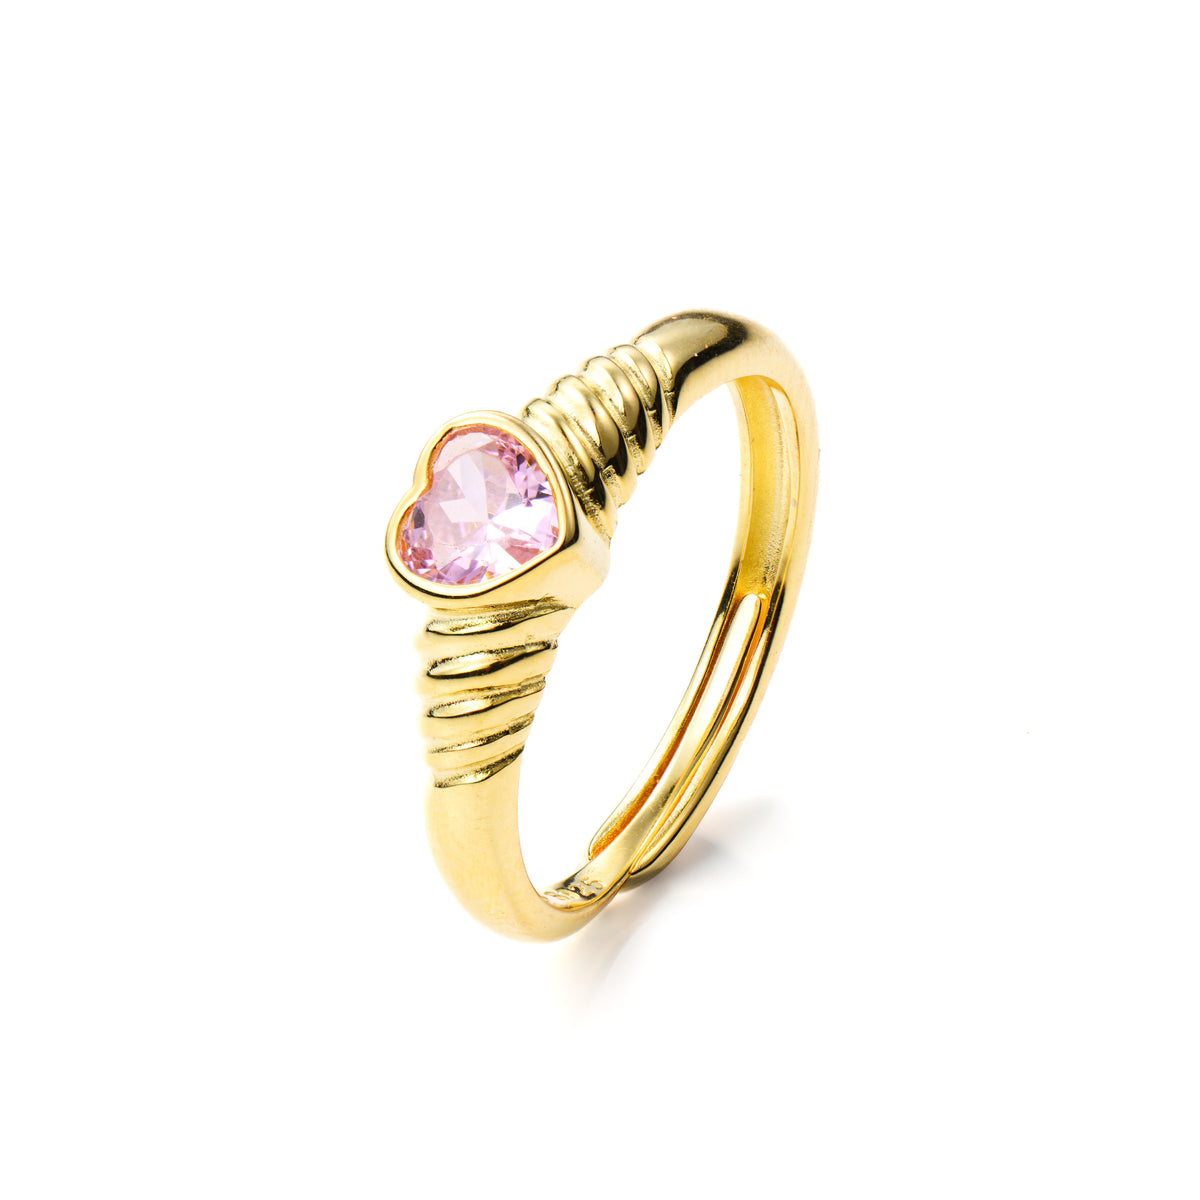 Memoires d'Amour gold plated Ring, Maison Stephanie